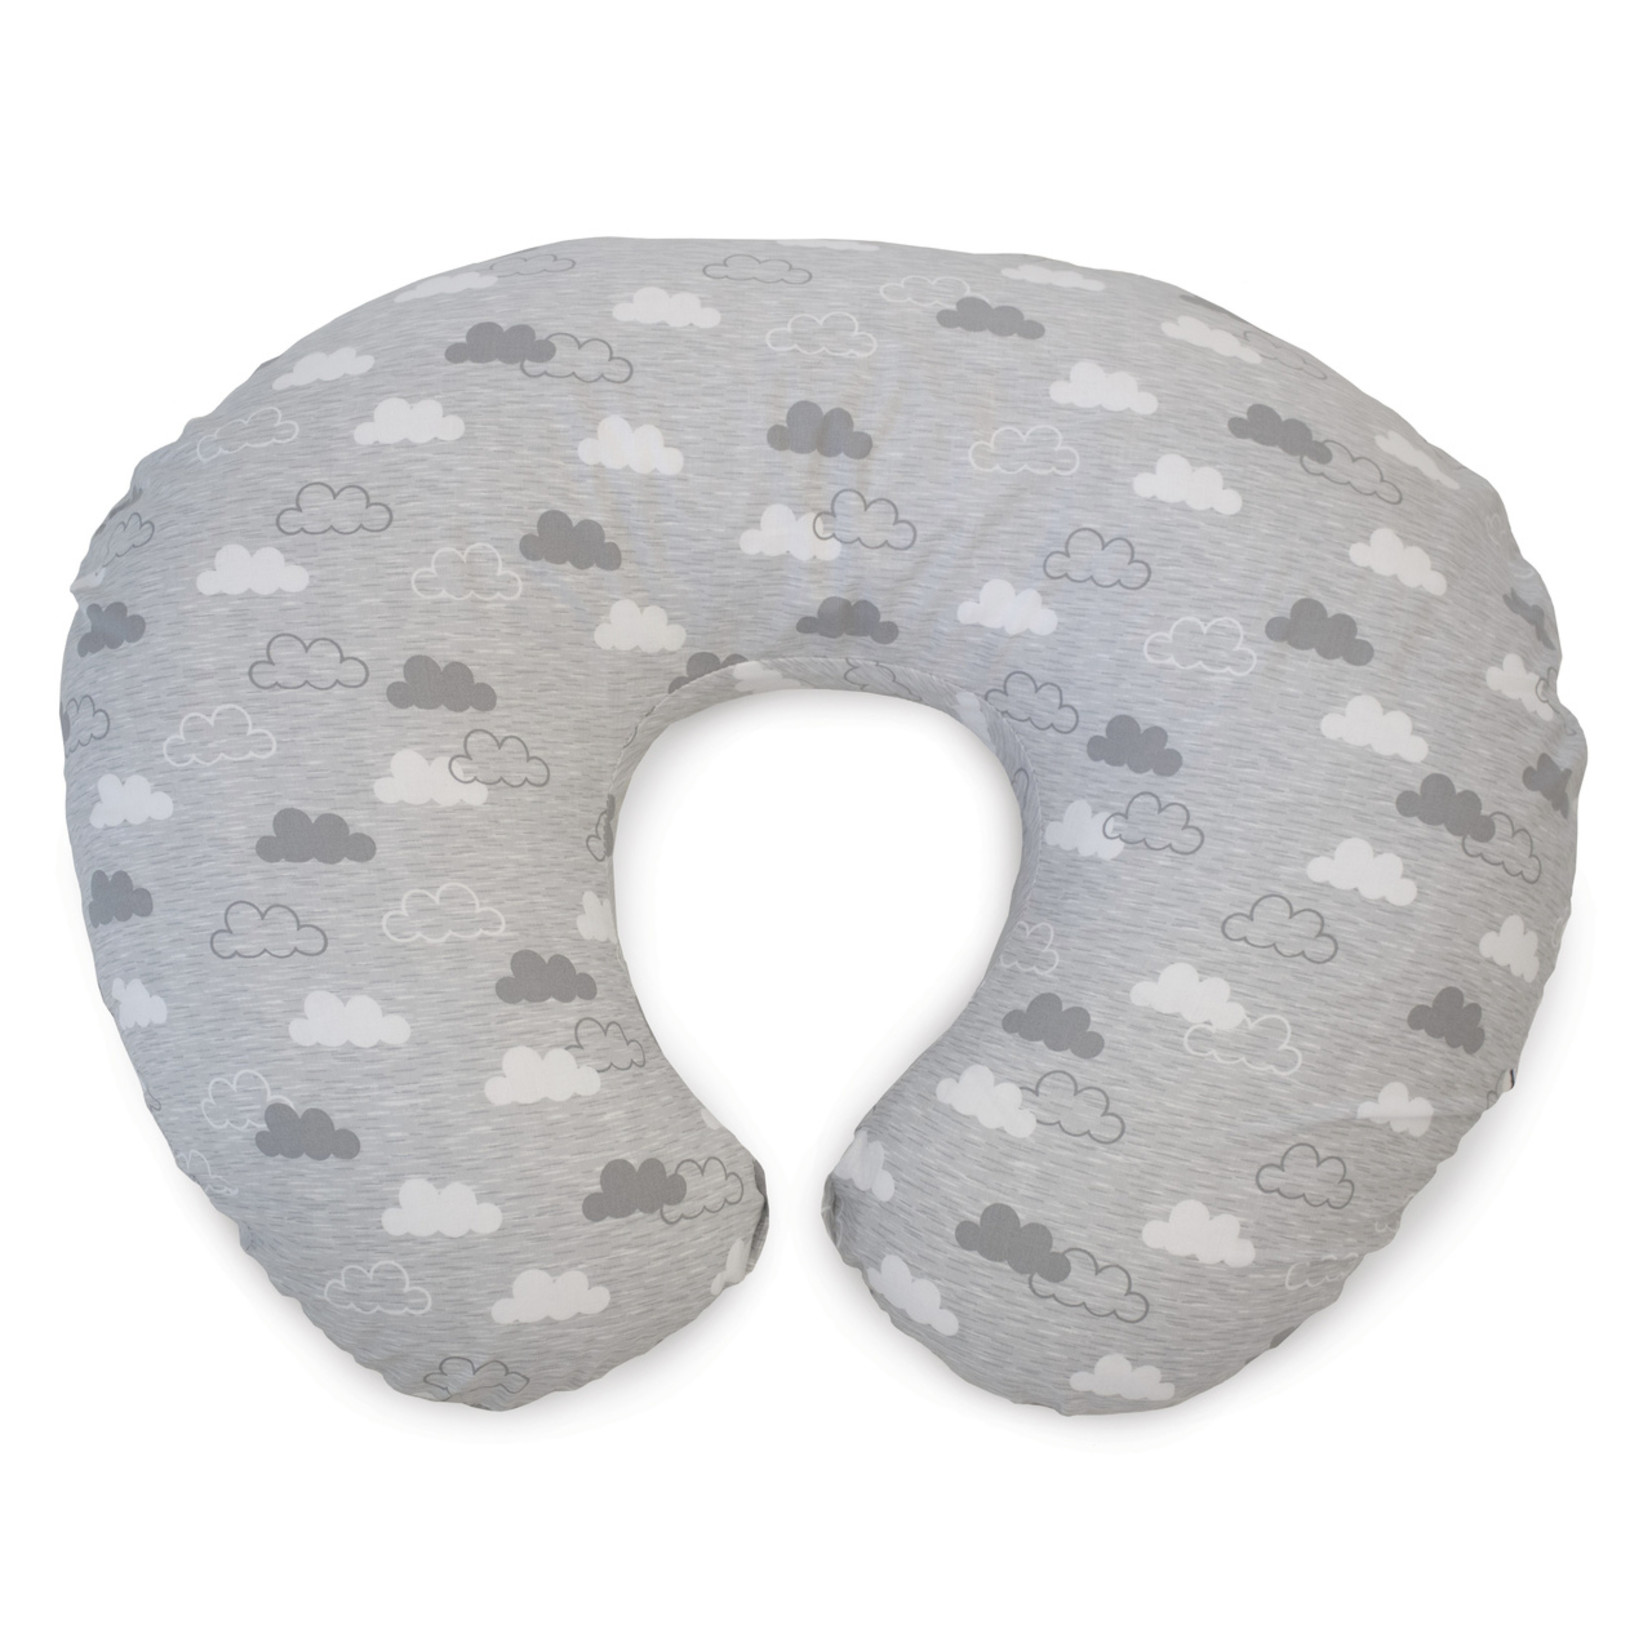 Chicco Boppy Pillow-Clouds